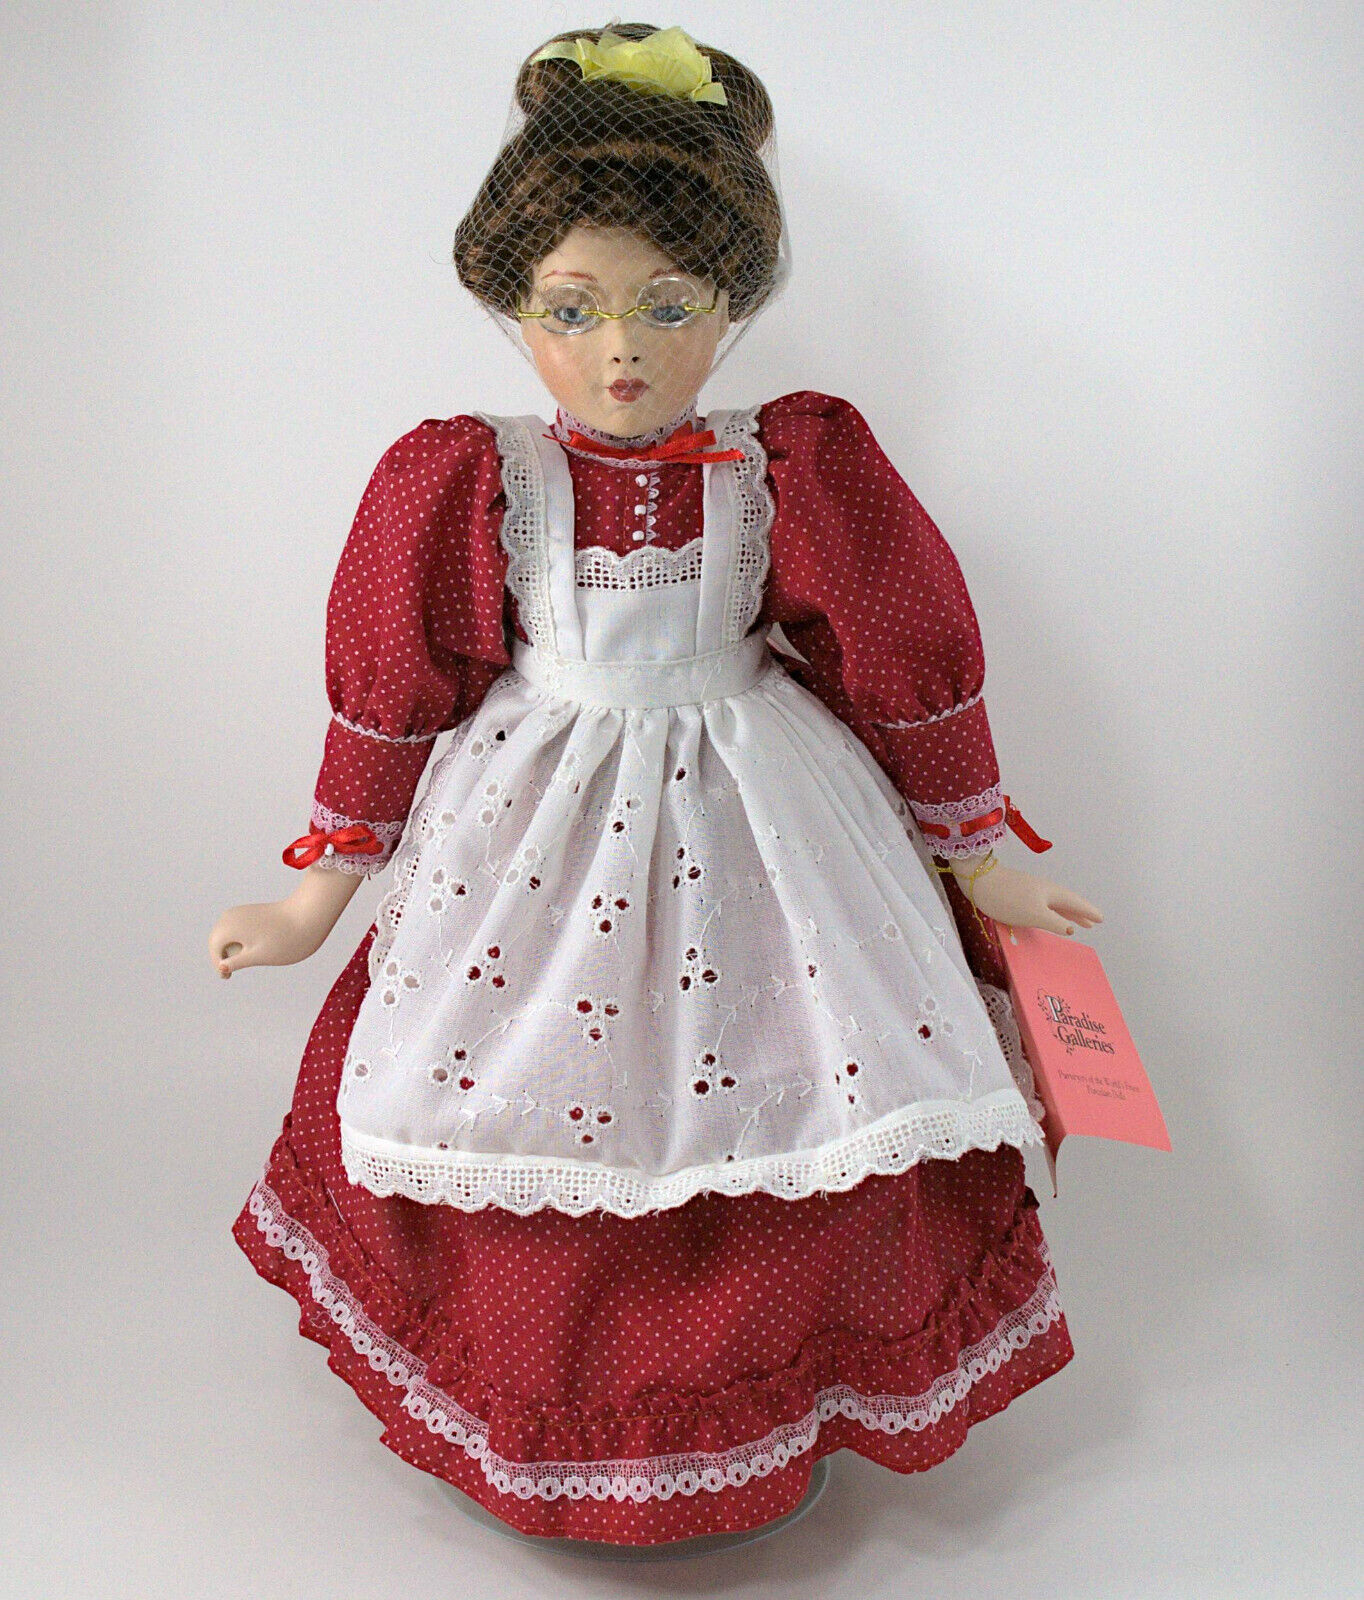 Treasury Collection Abigail  Porcelain Doll w/Accessories Paradise Galleries NIB - $19.99